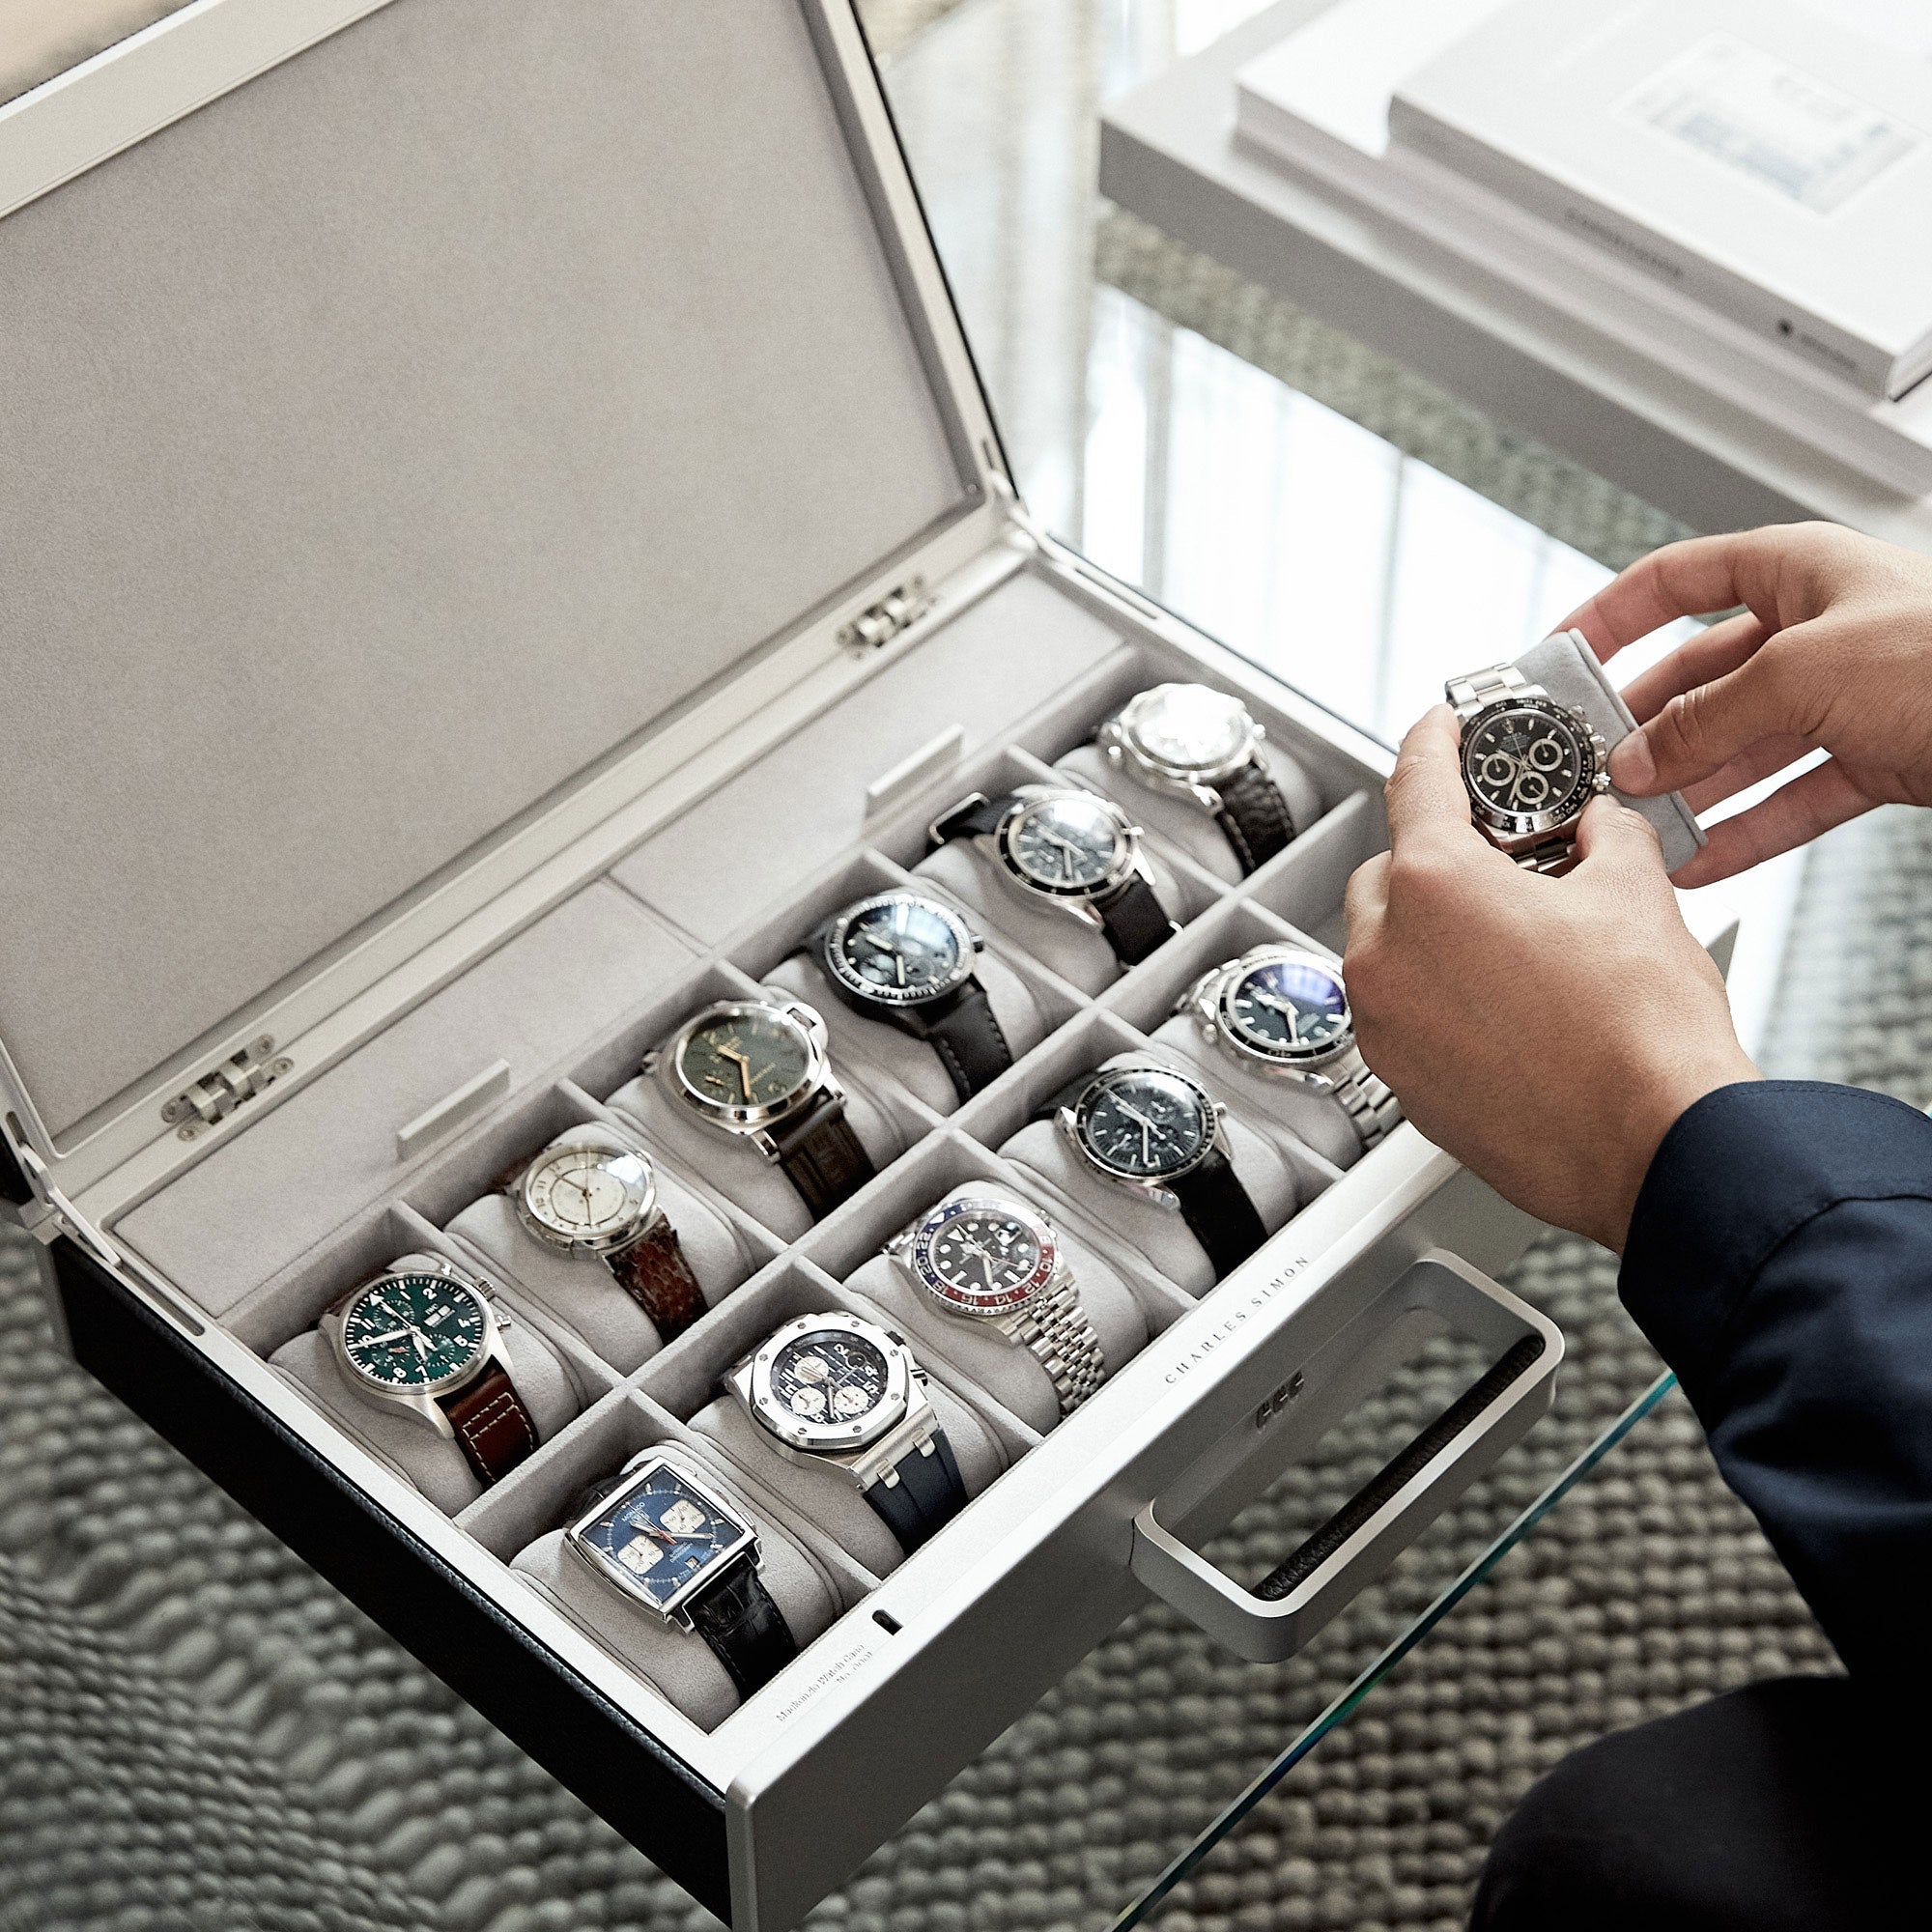 Lifestyle shot of open Mackenzie Watch case 12 by Charles Simon containing a watch collection of 12 luxury watches, including Rolex, Blancpain, Panerai and Jaeger-LeCoultre. Man is holding watch placed on removable Alcantara cushion